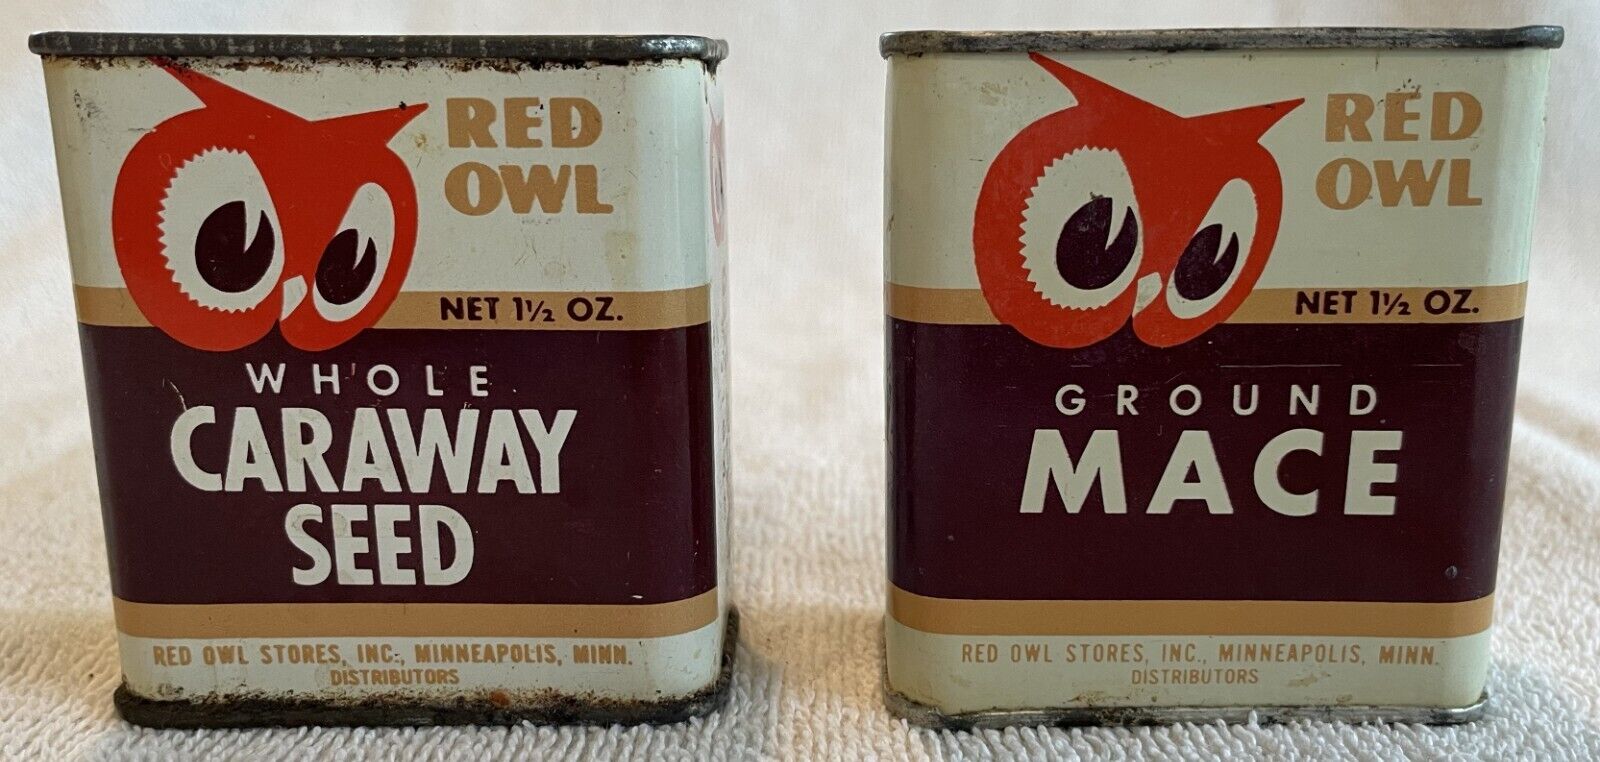 Vintage Lot of Two Red Owl Spice Tins - Caraway Seed and Ground Mace